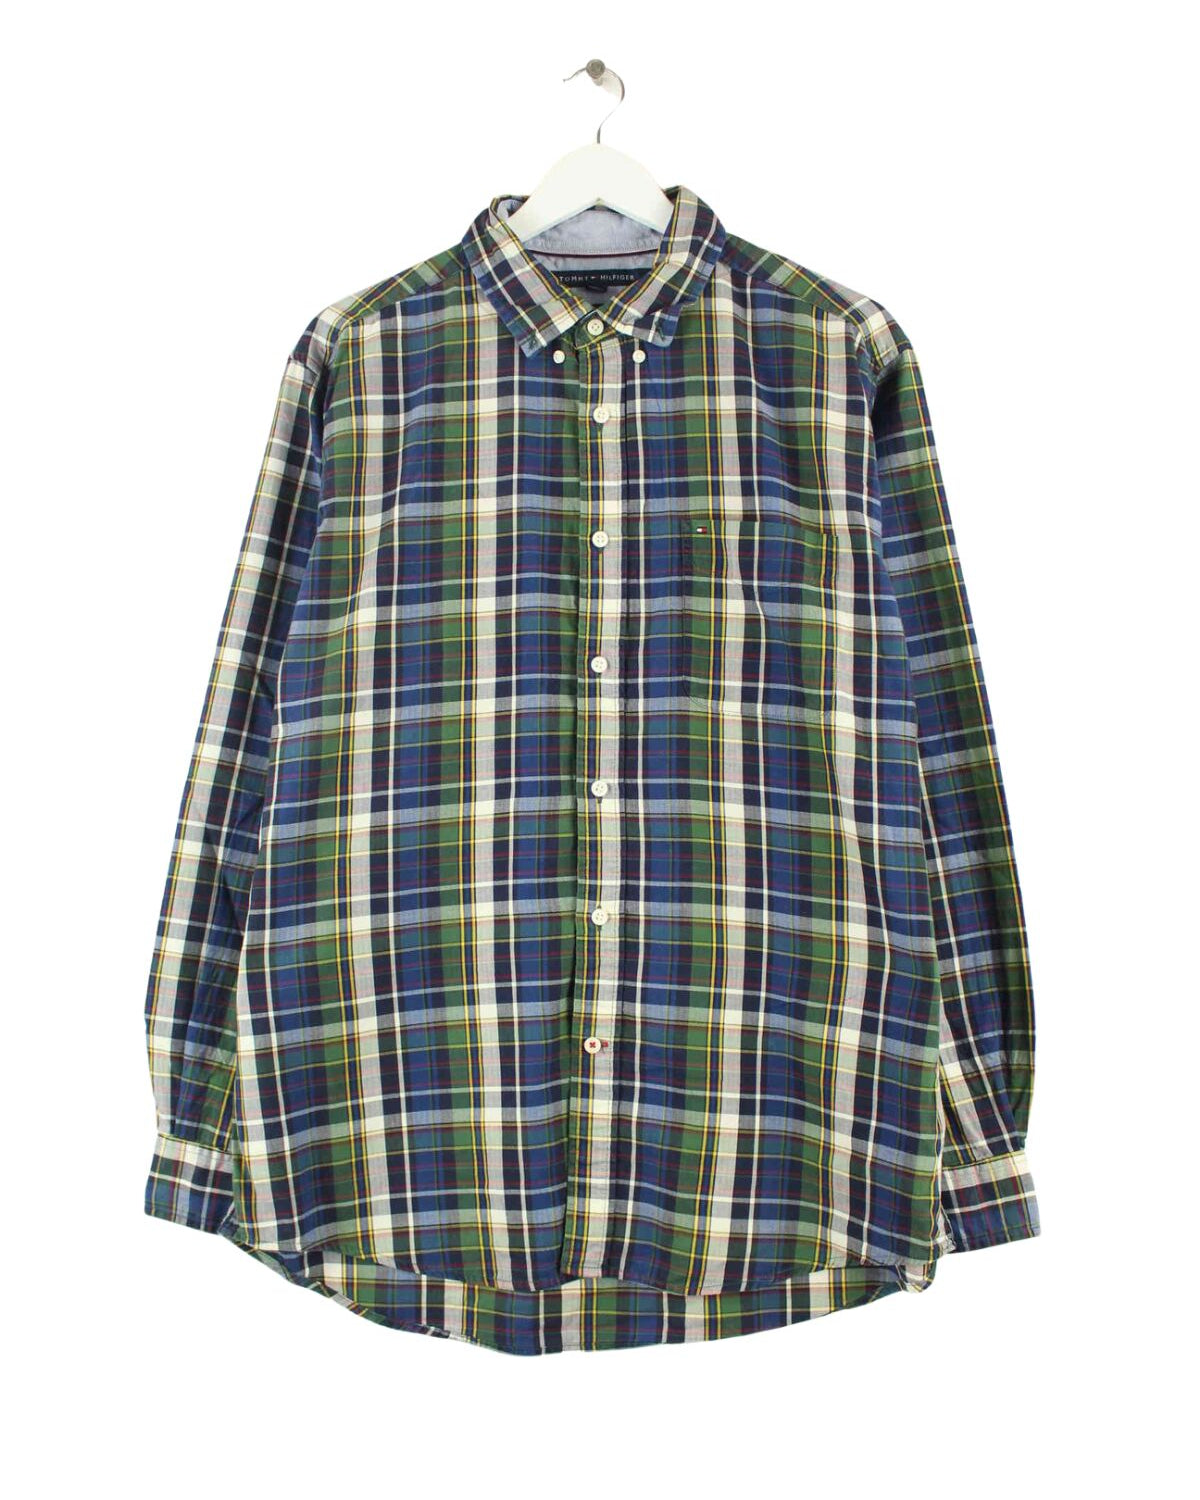 Tommy Hilfiger Classic Fit Checked Hemd Mehrfarbig L (front image)